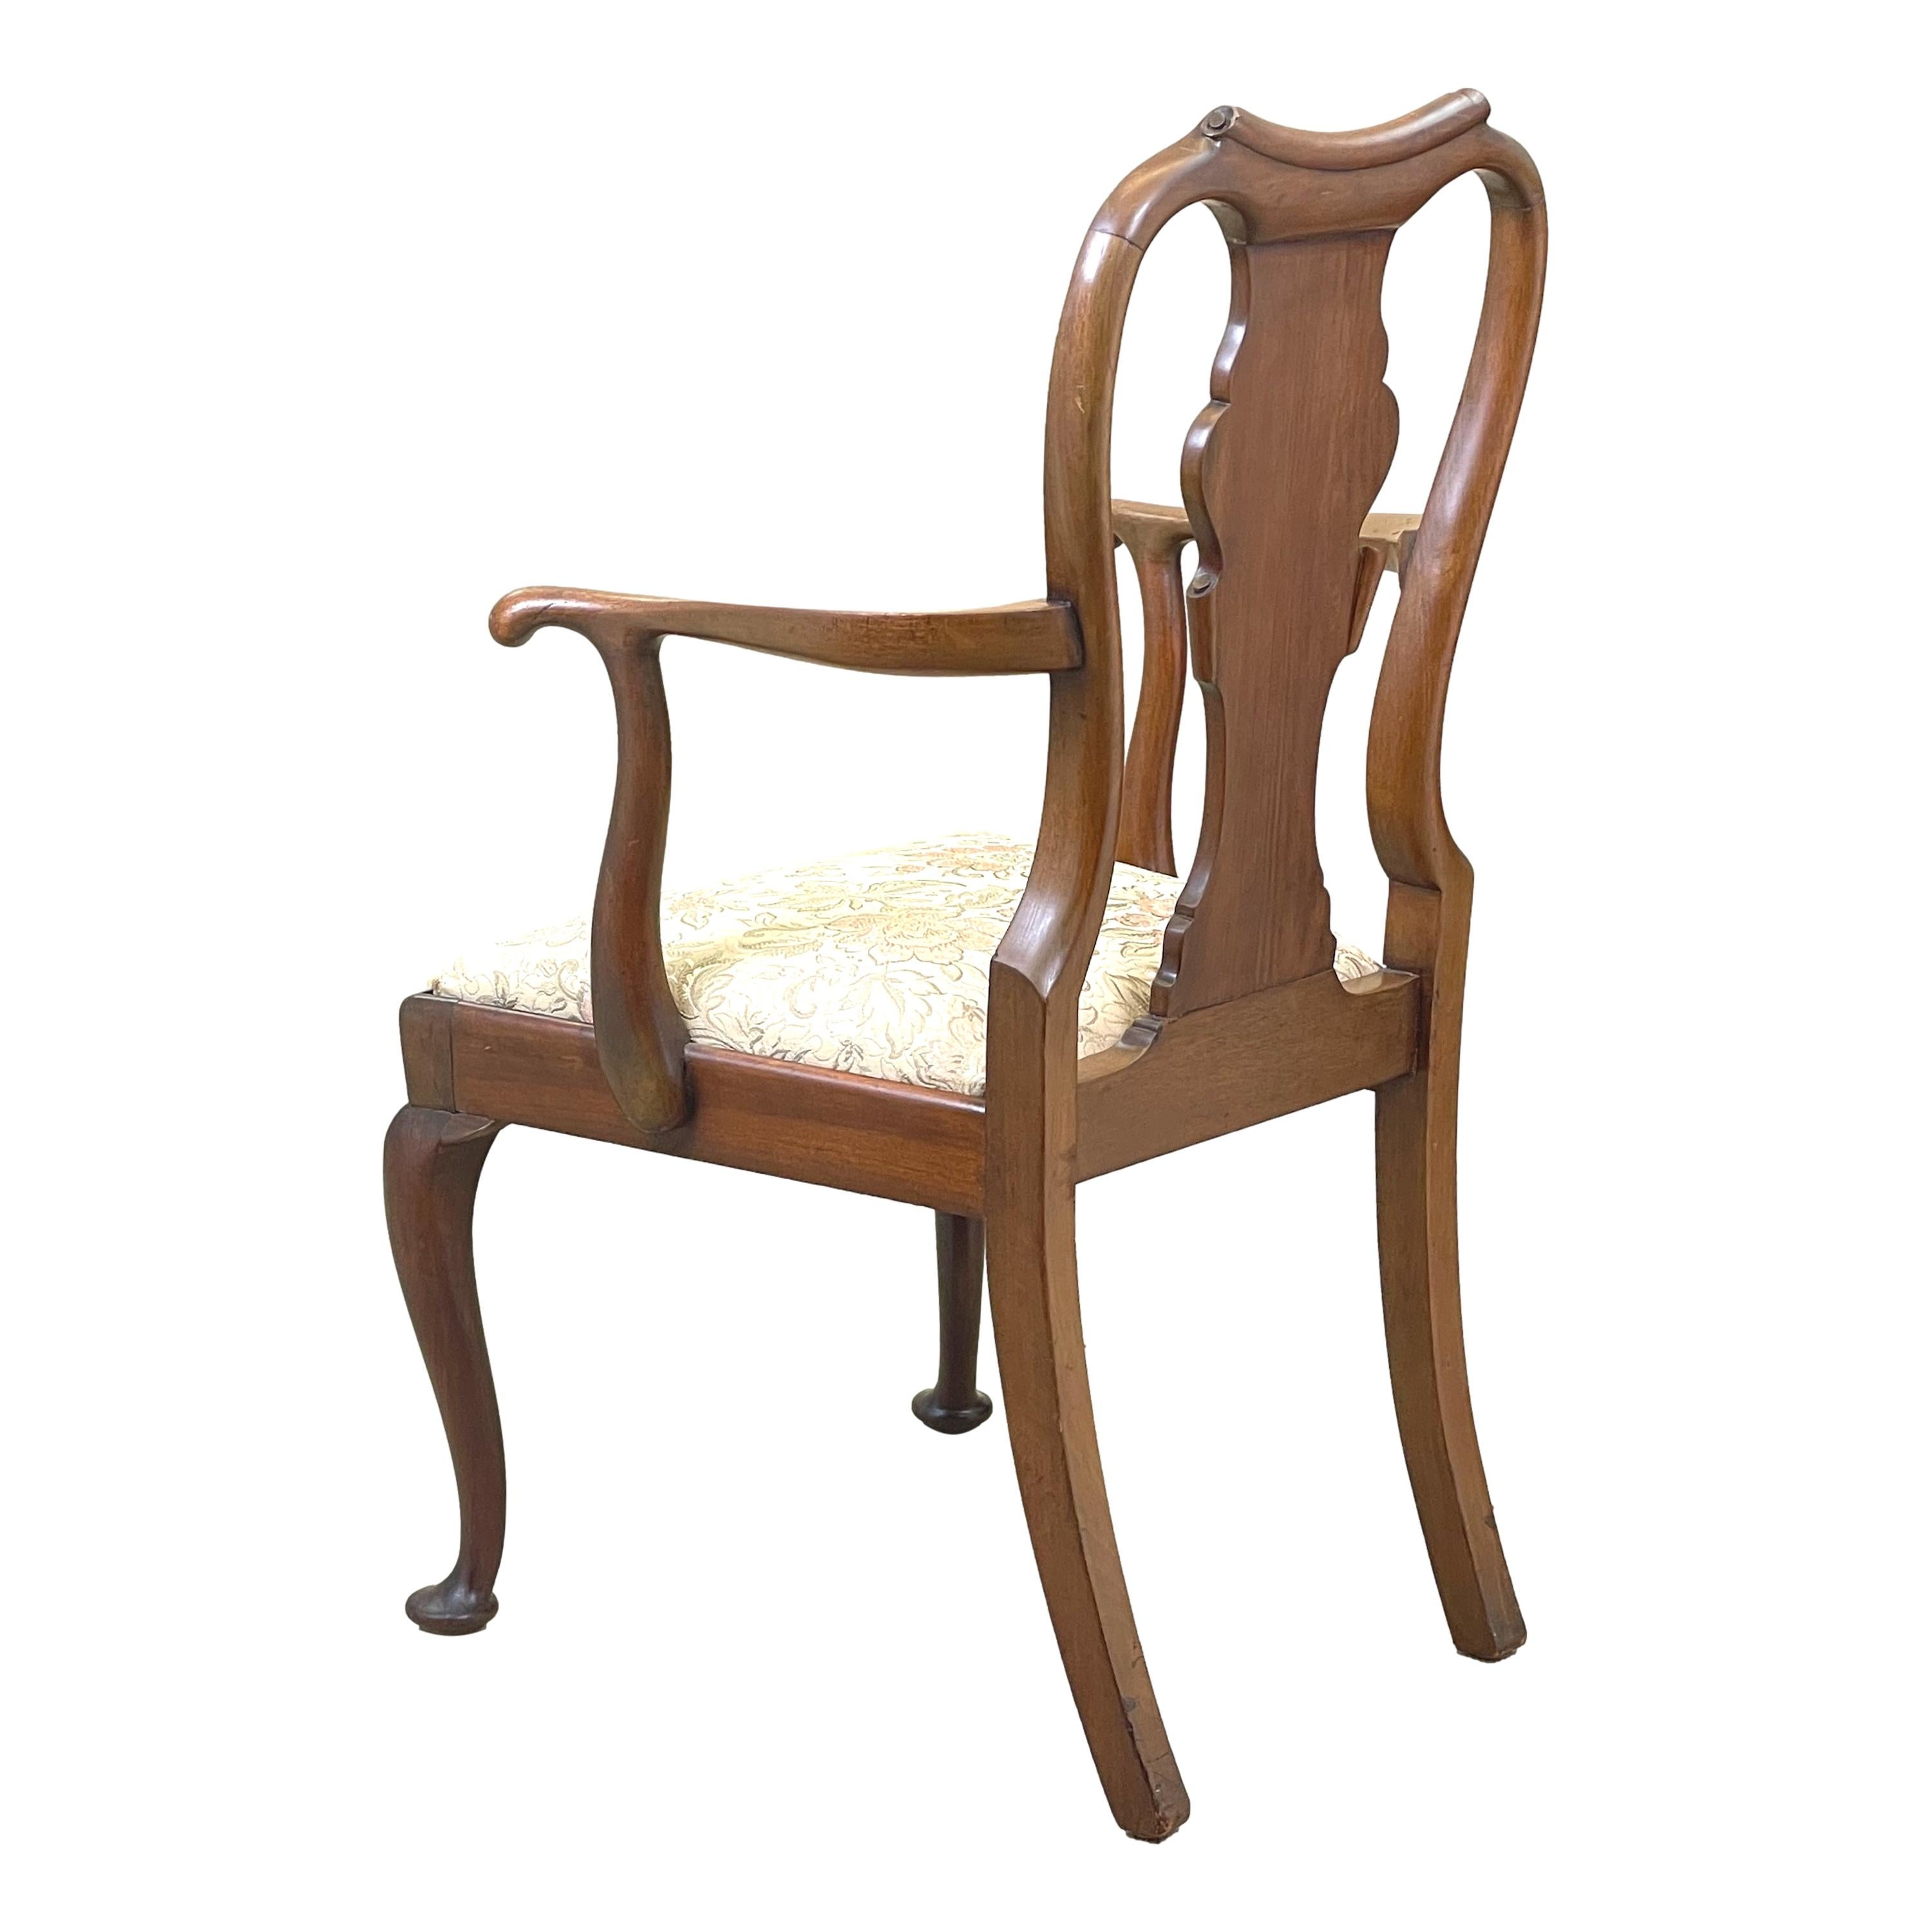 Queen Anne Style Walnut Childs Chair In Good Condition For Sale In Bedfordshire, GB